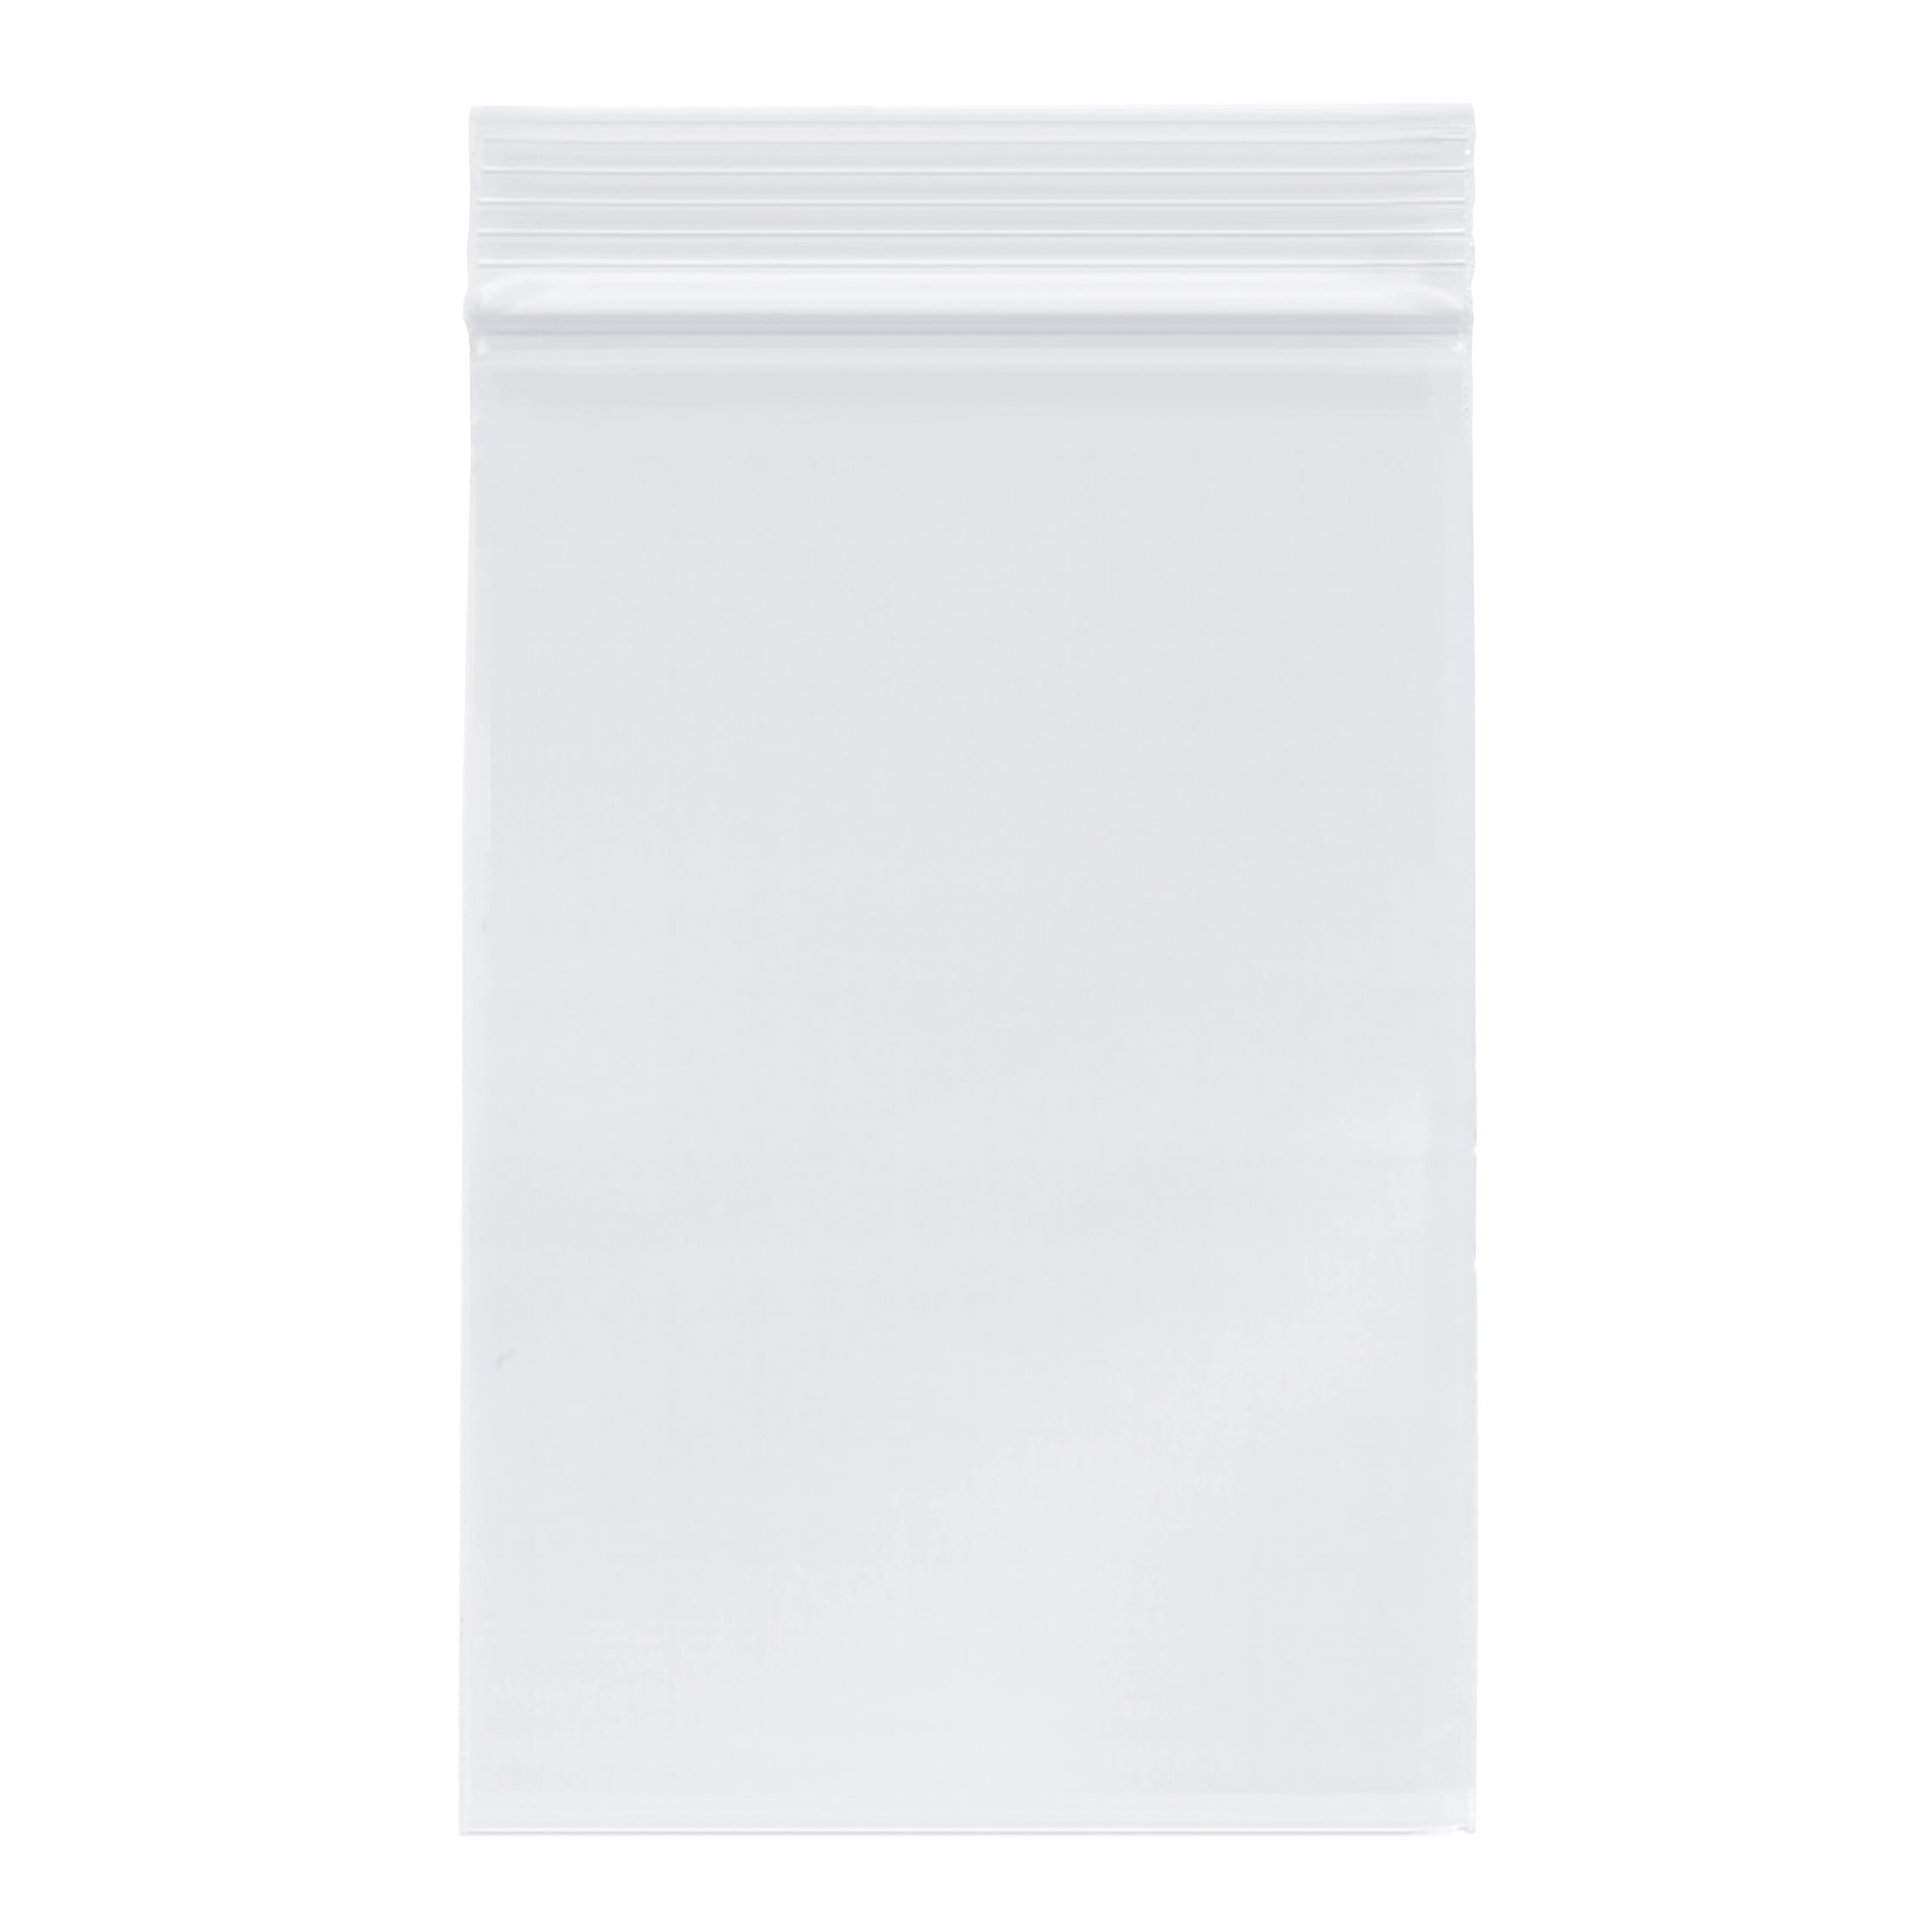 Tiny Bags w/ Hanging Hole 4" x 6" 2 Mil Clear Resealable Baggies 200 Pcs